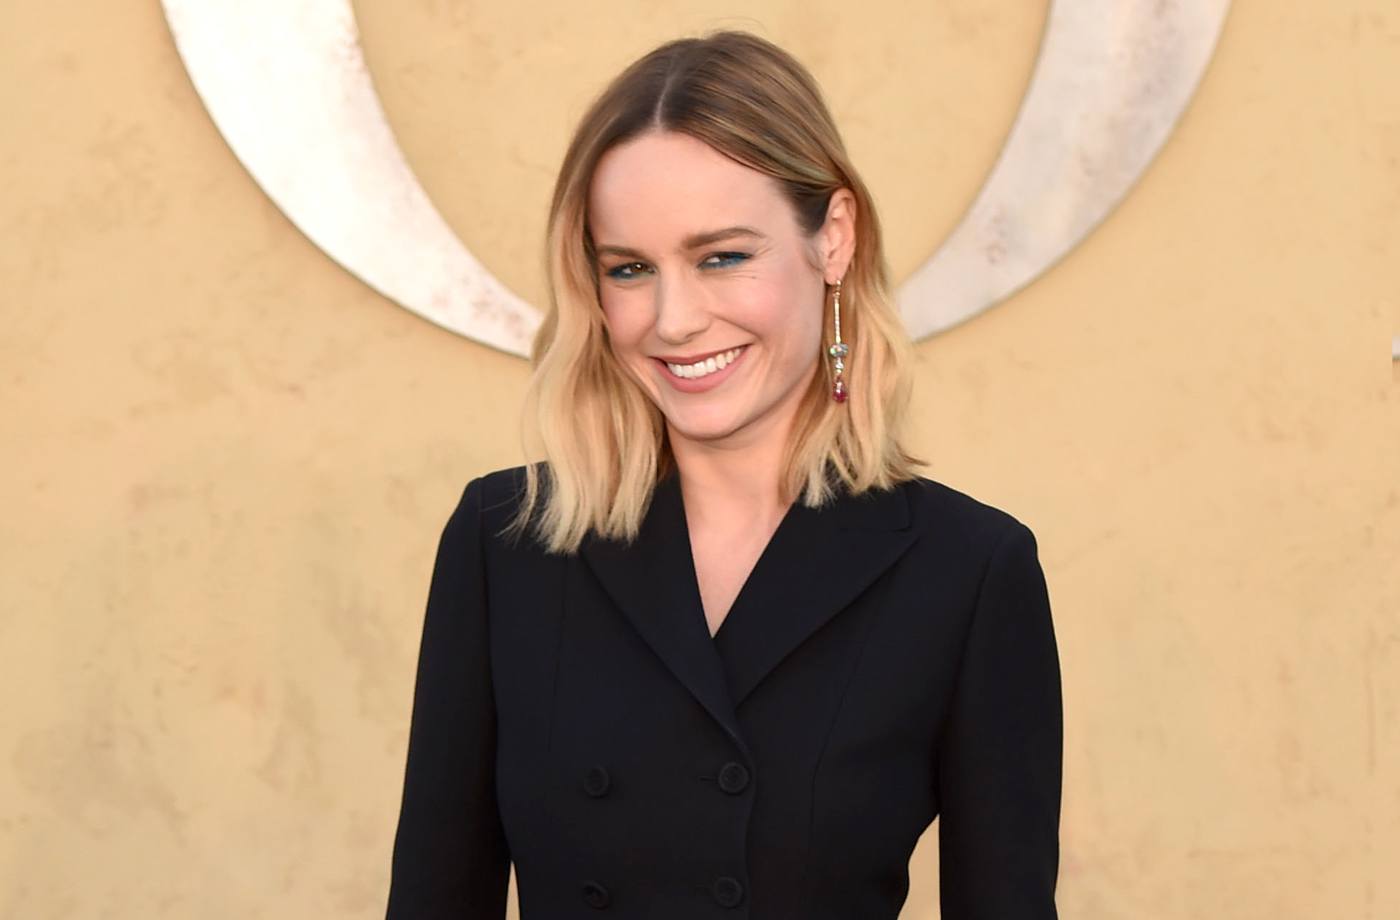 Brie Larson is a total badass, and here are 8 workout vids to prove it